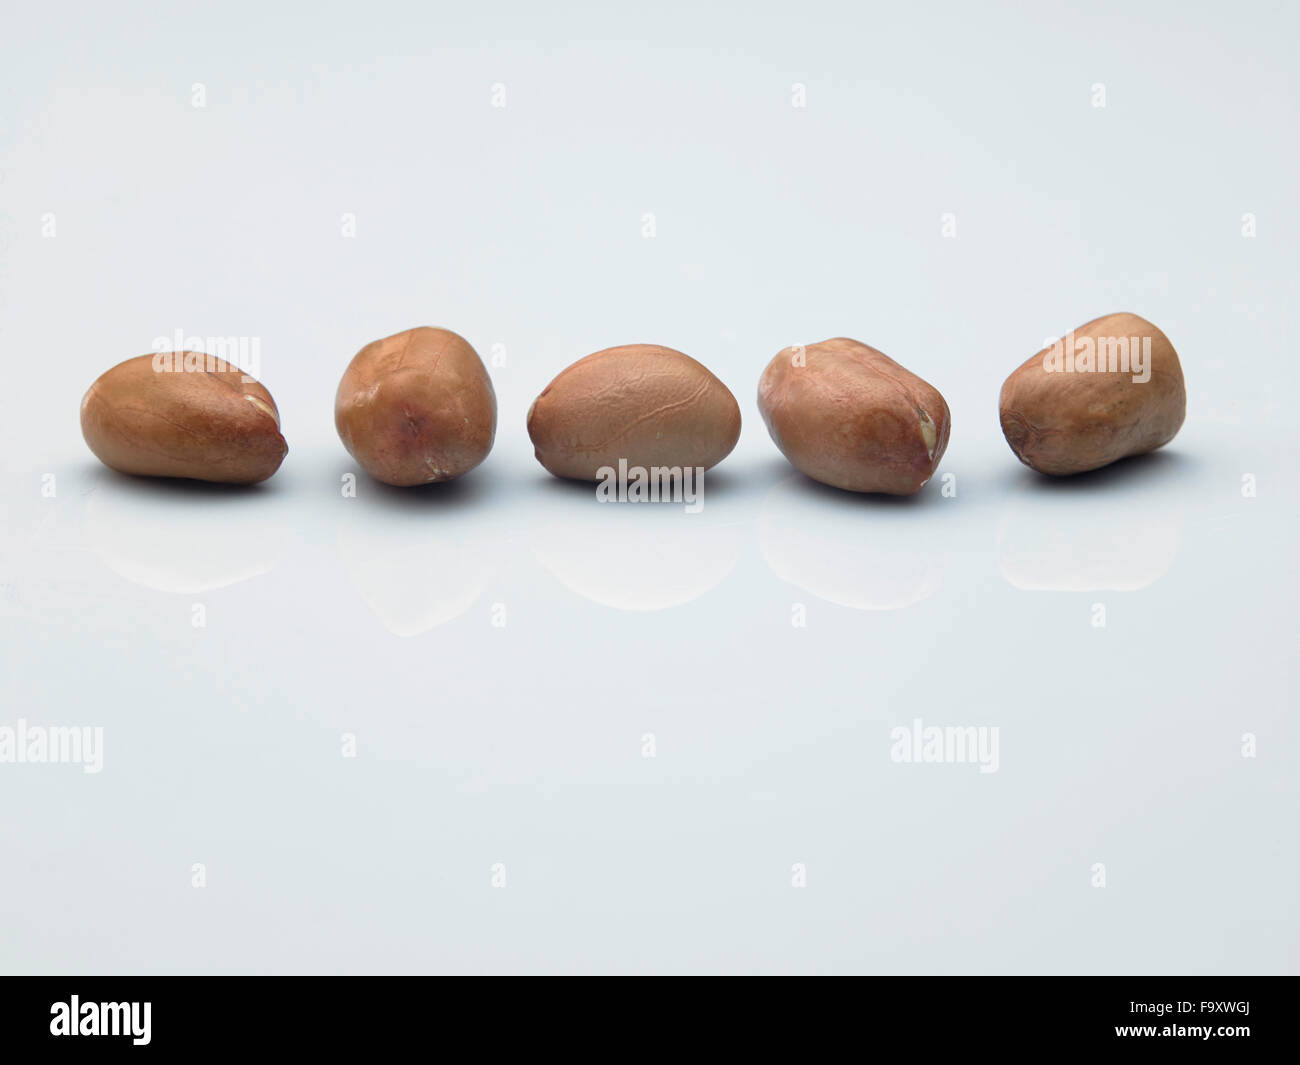 Peanuts in a row on white ground Stock Photo